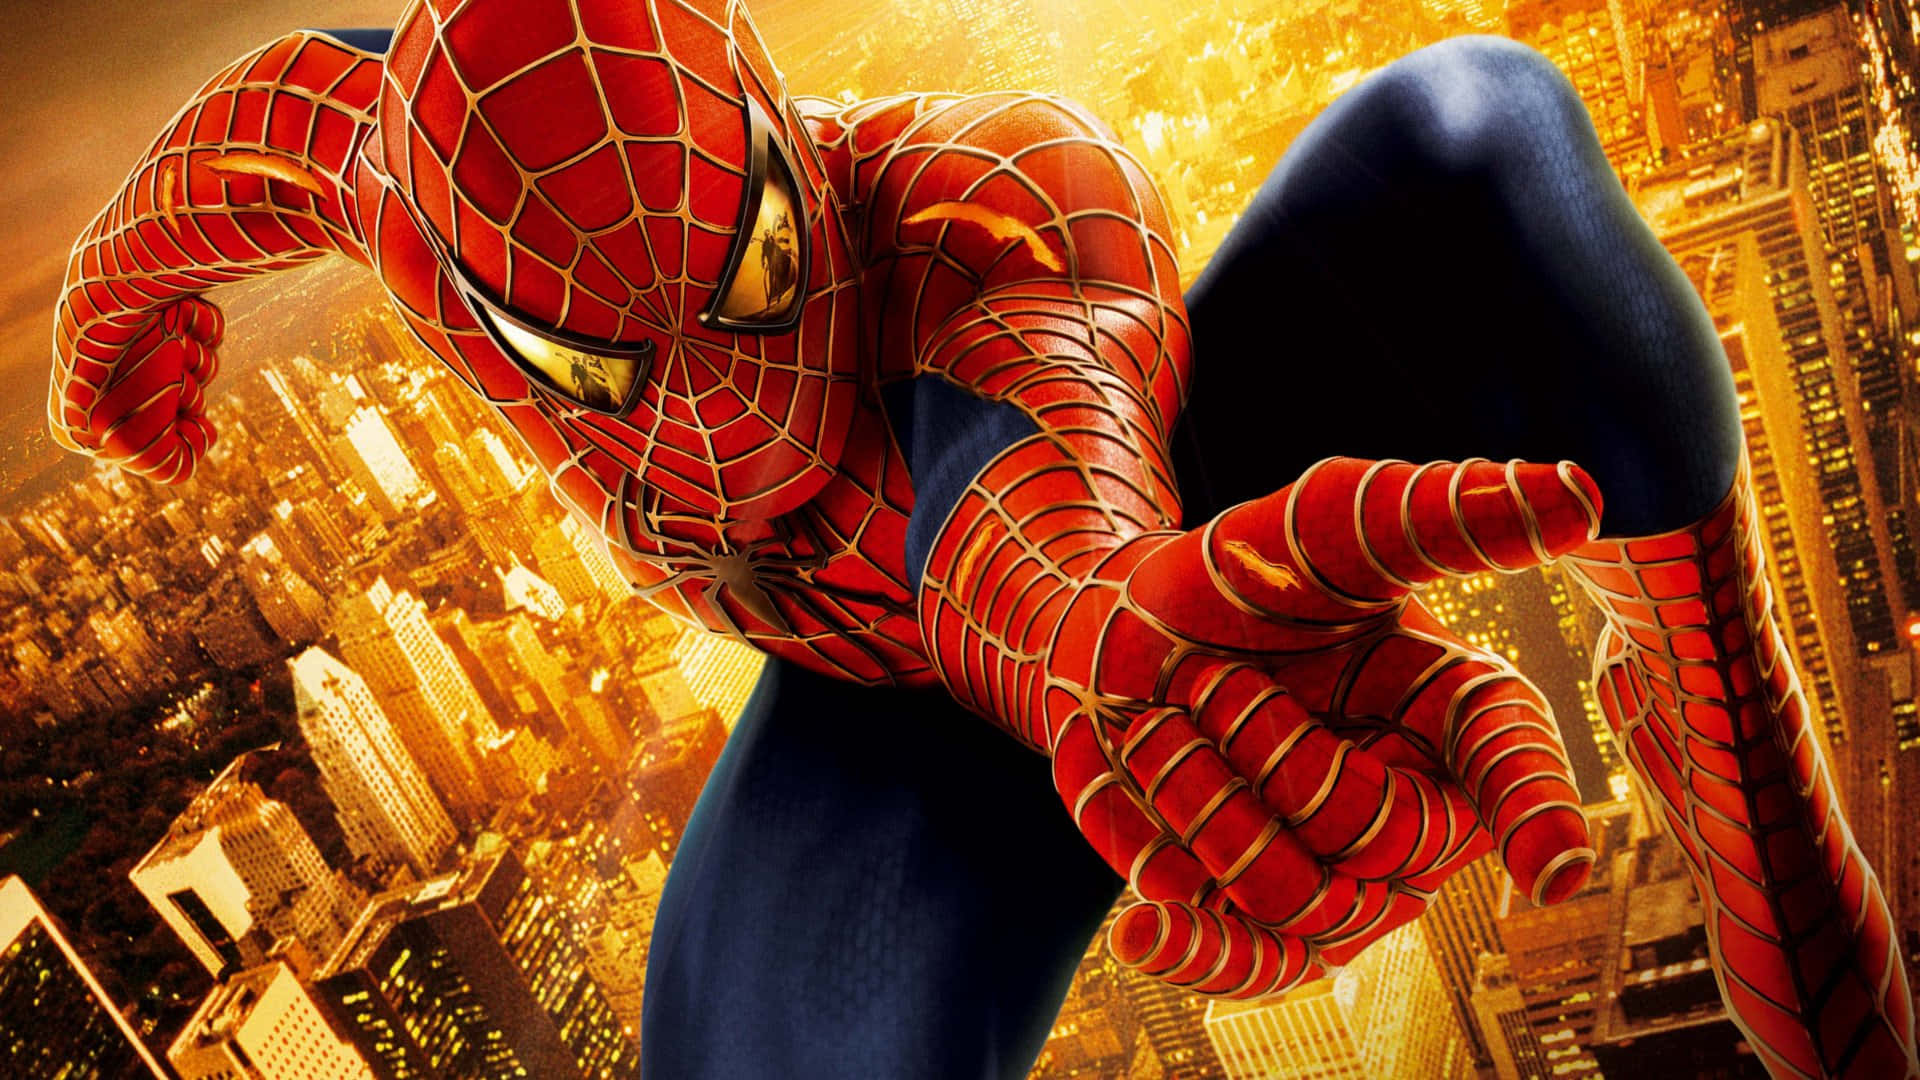 Spider Man 2, joined by friends for a high-speed chase Wallpaper